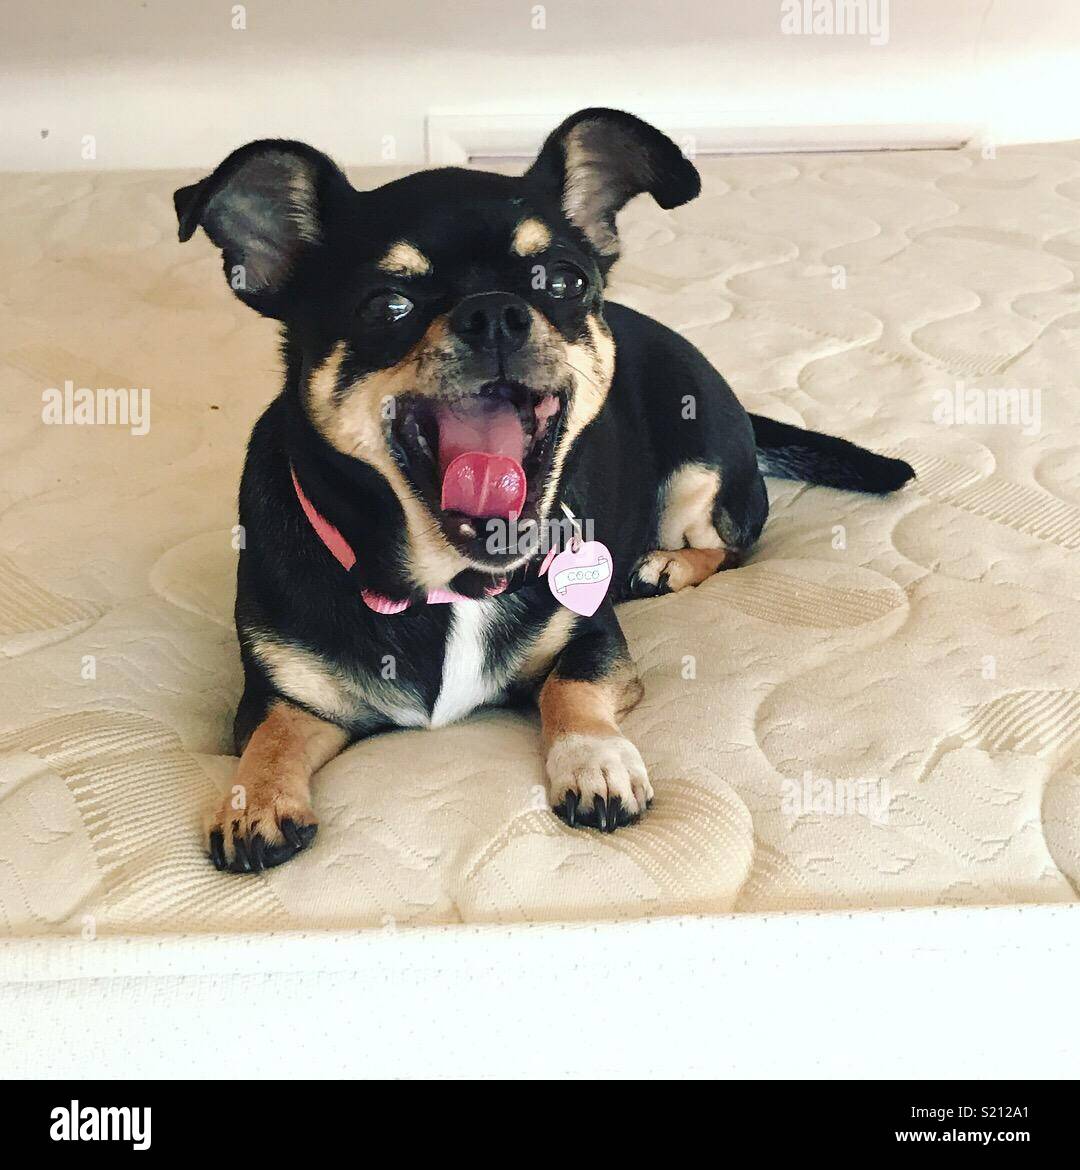 Coco, the chihuahua being cheeky Stock Photo